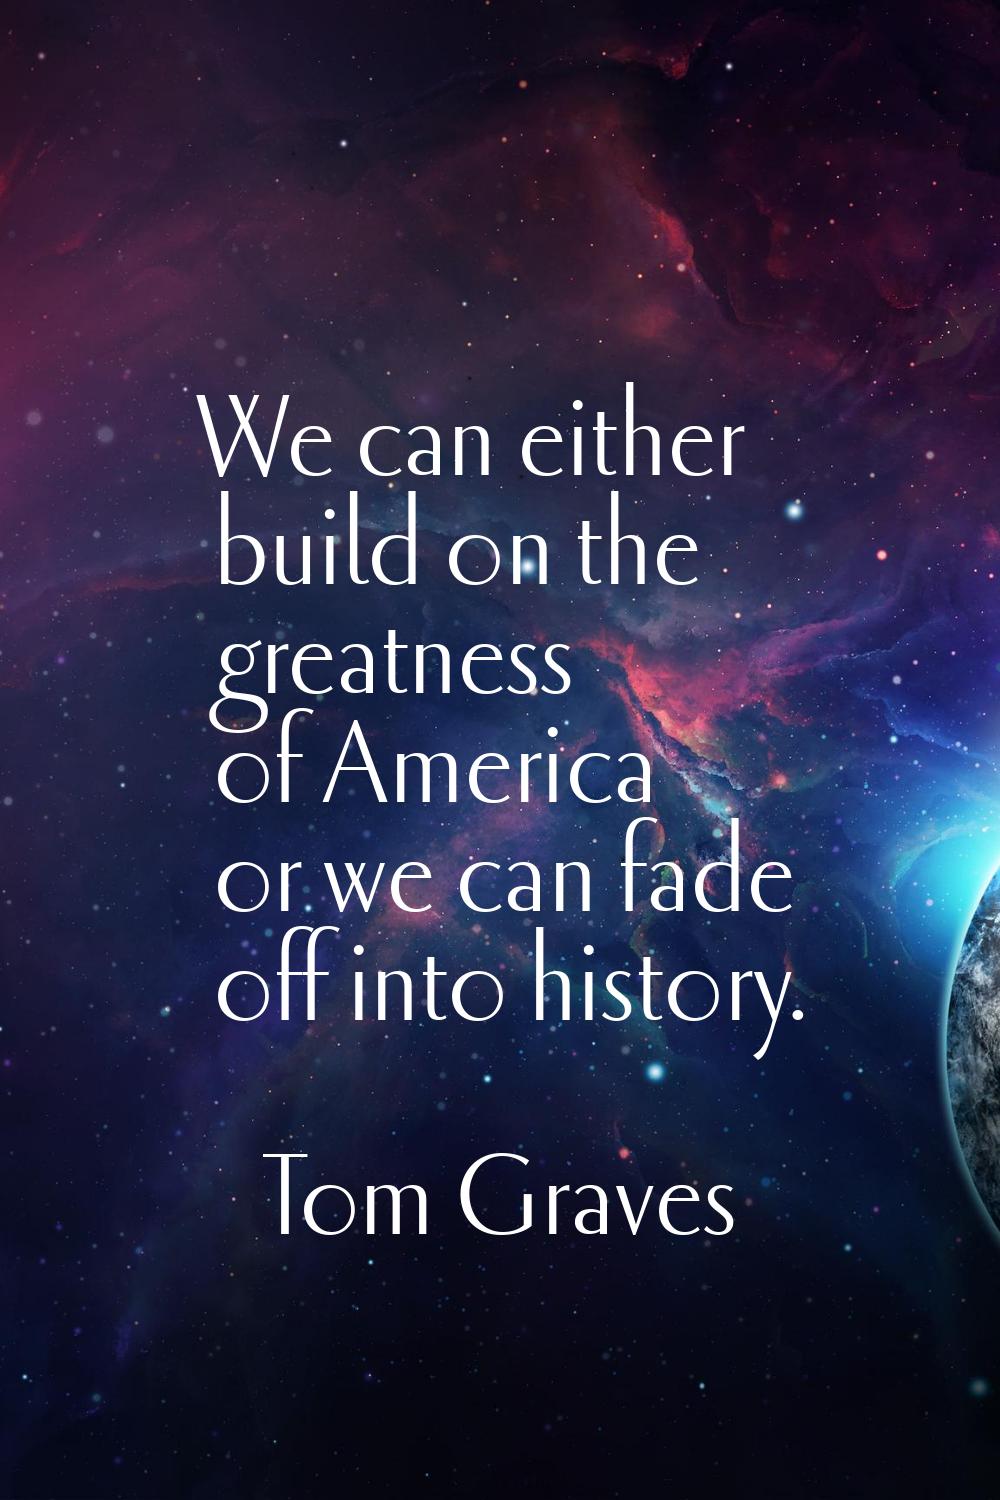 We can either build on the greatness of America or we can fade off into history.